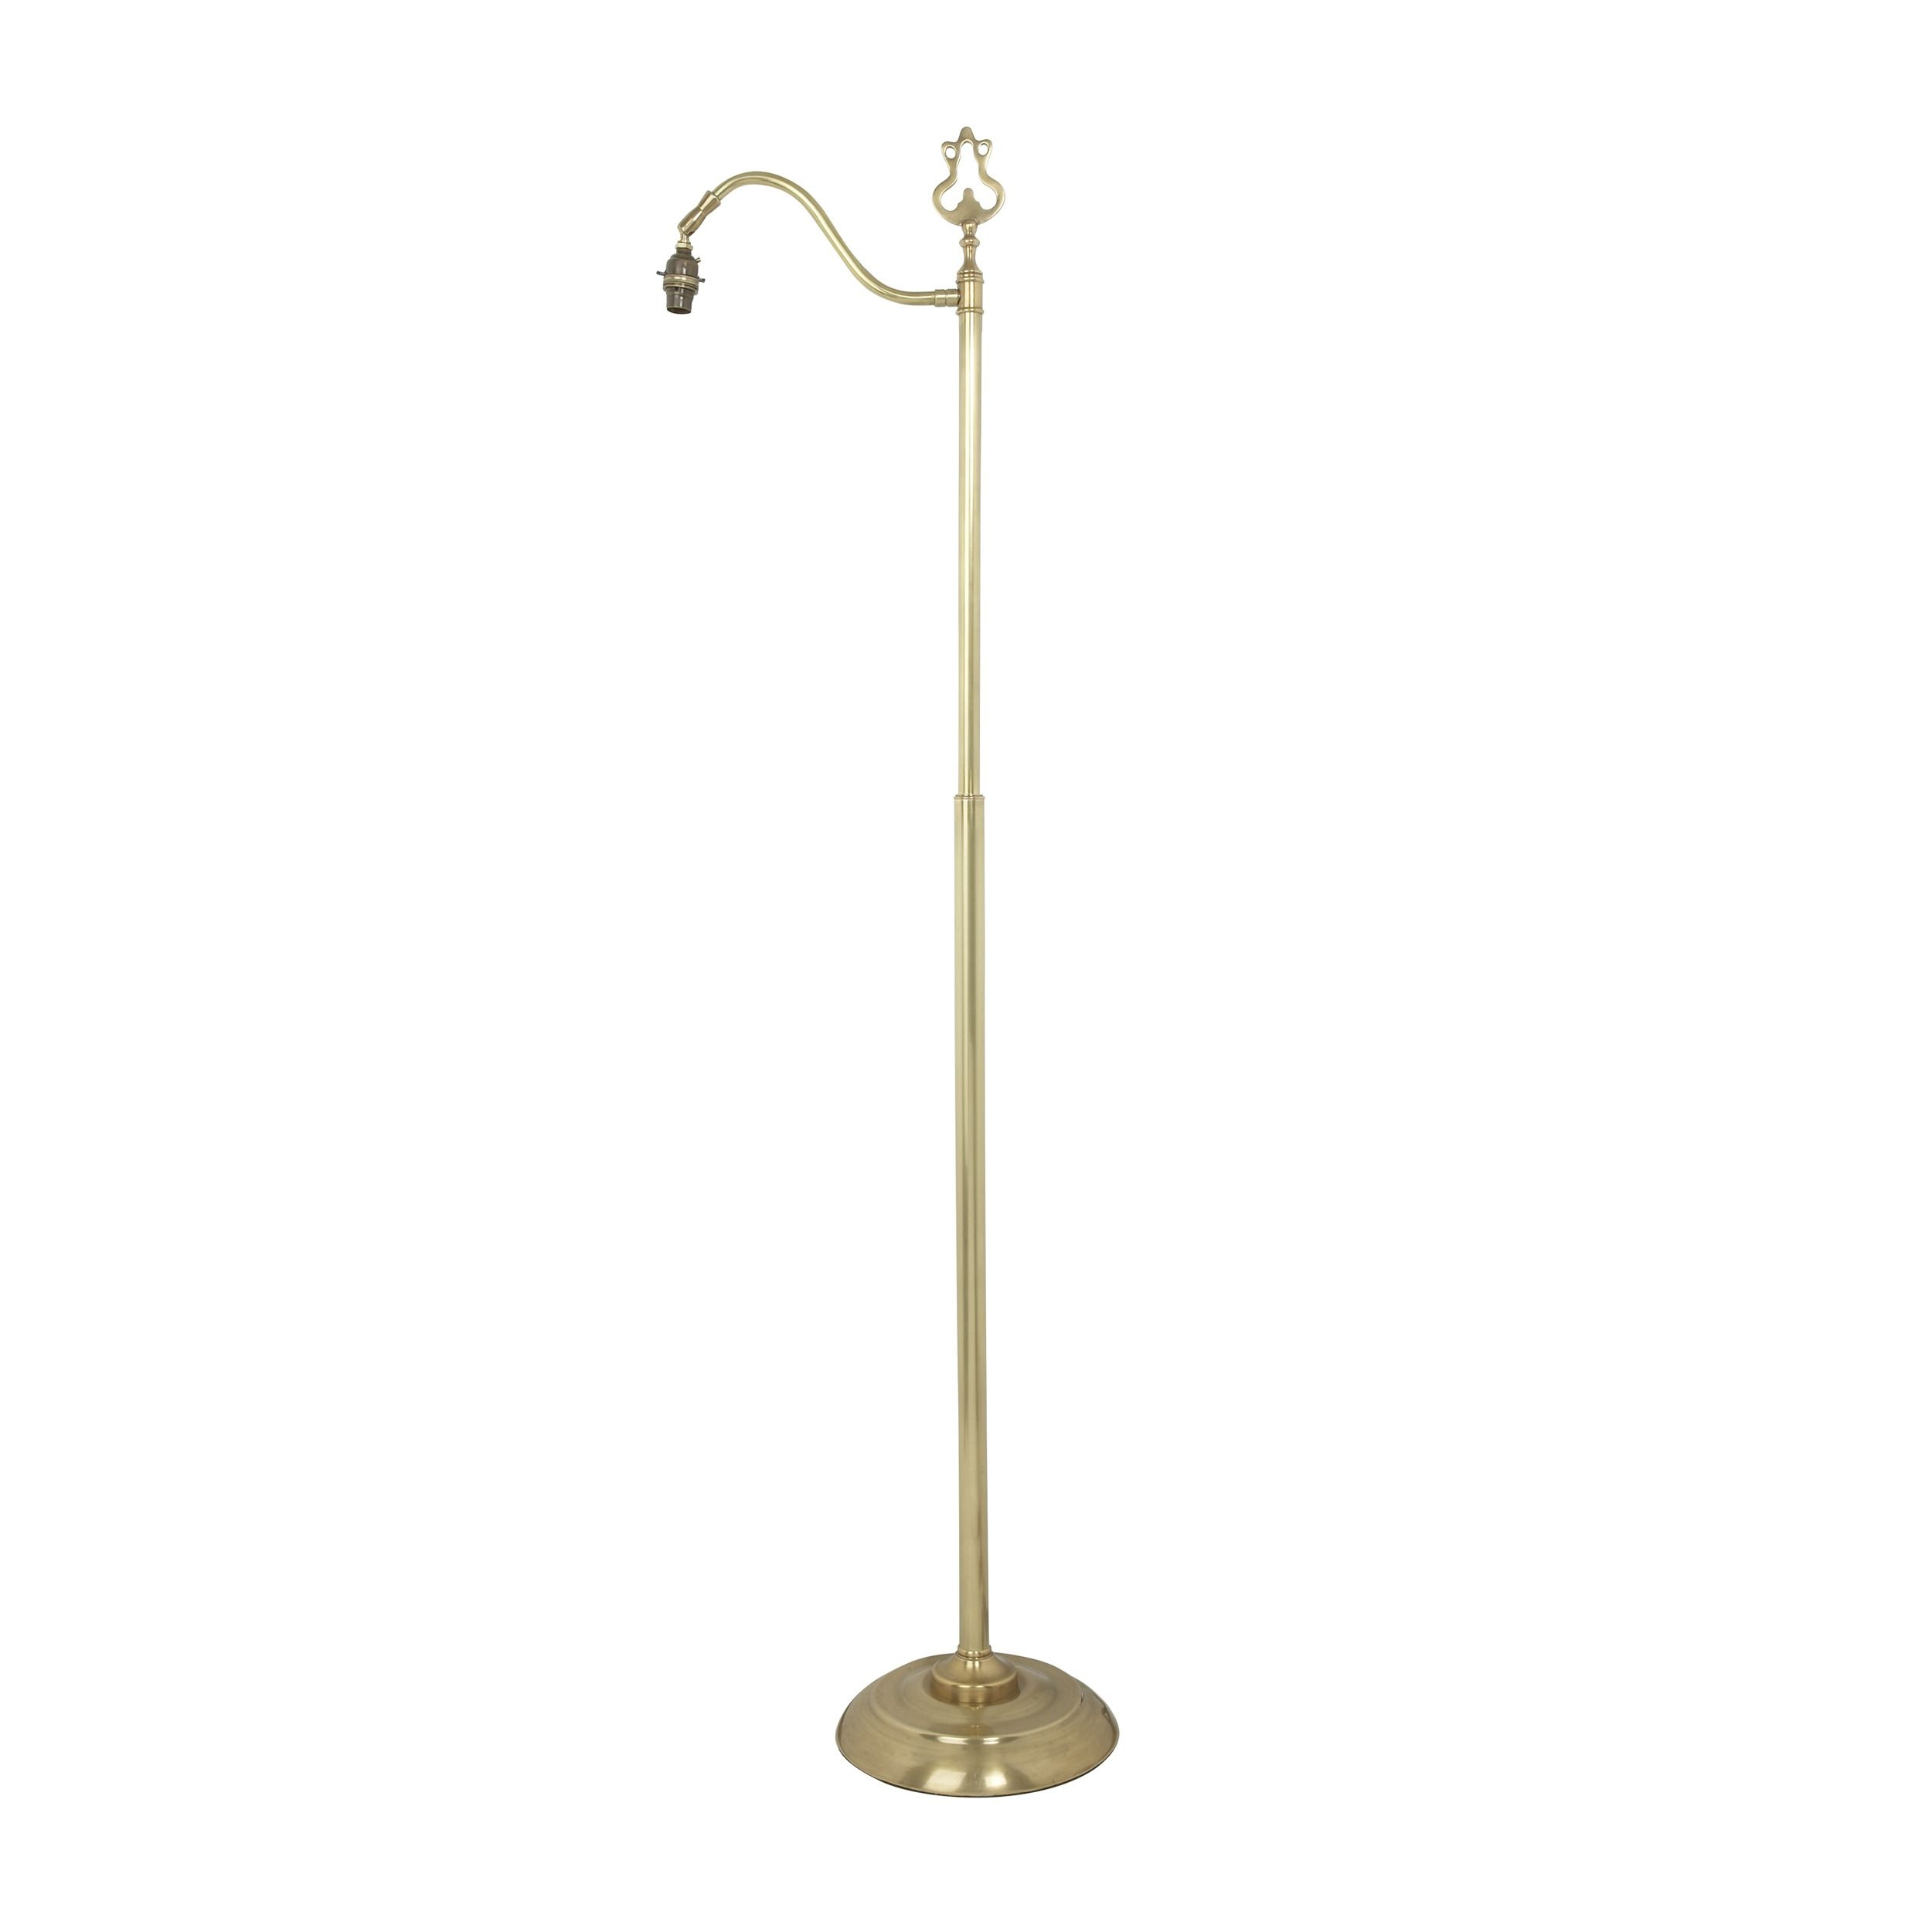 Leamington Antique Brass Floor Lamp Antique Brass Floor intended for size 2500 X 2500